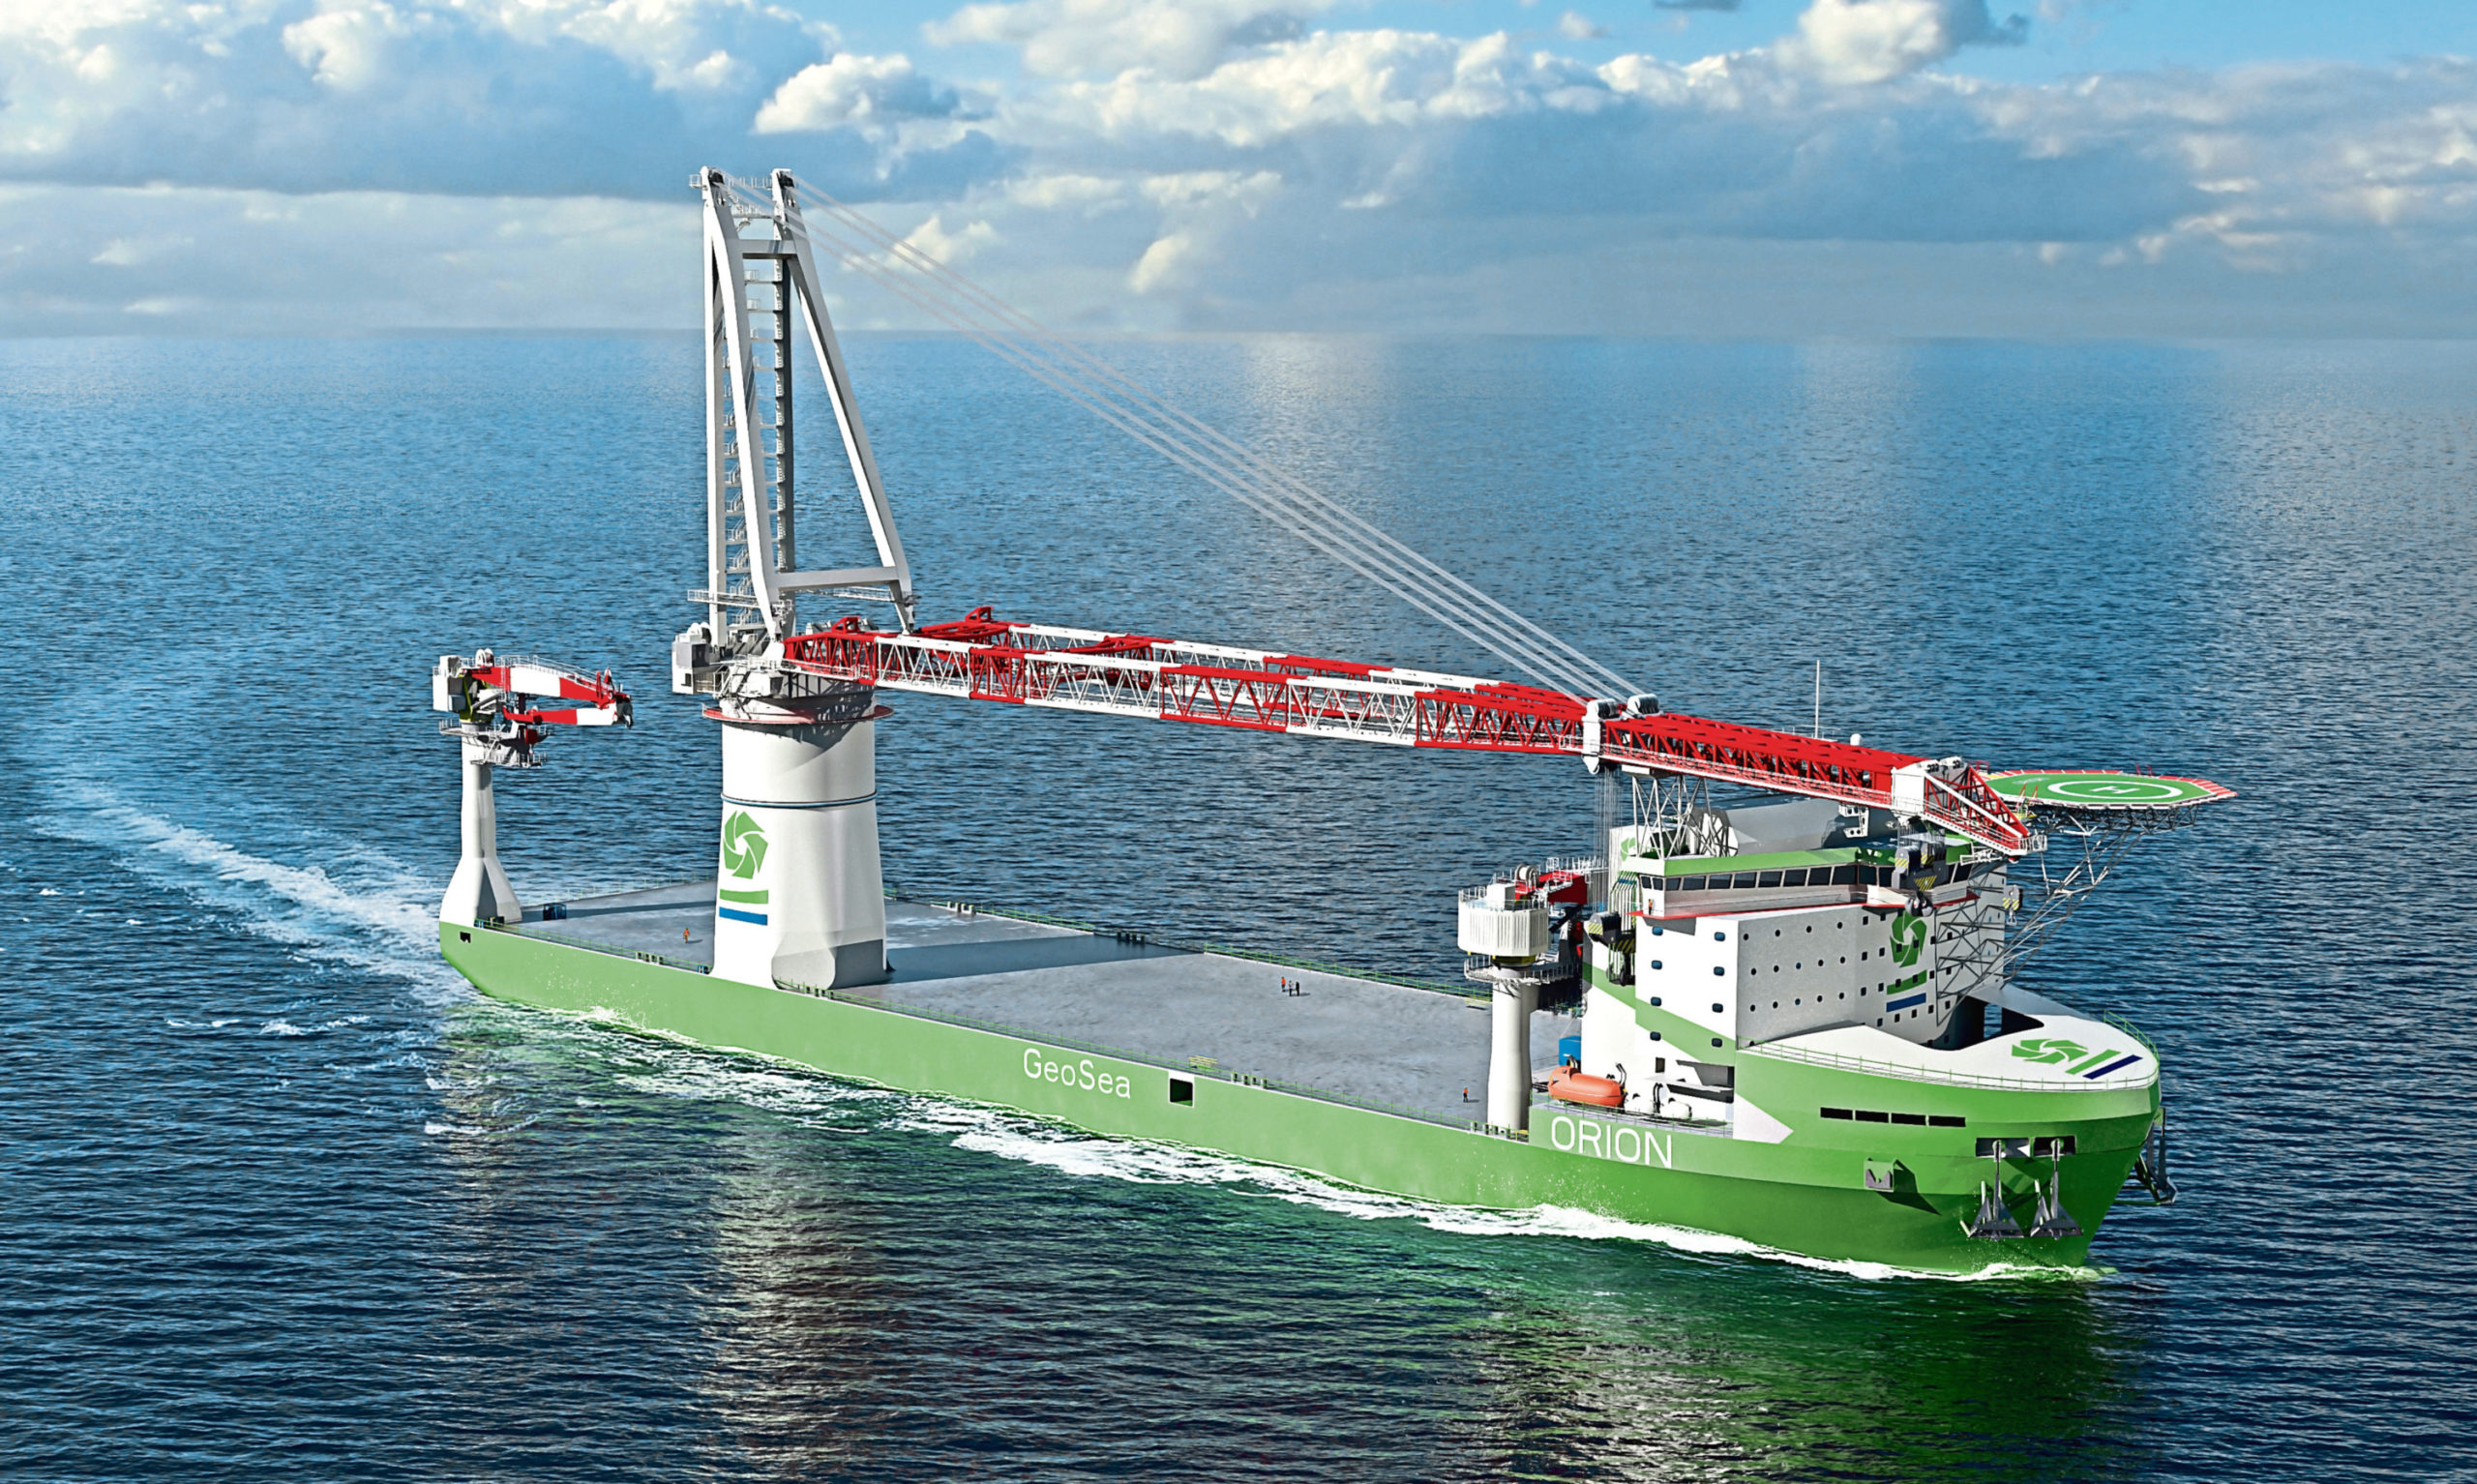 Belgian company DEME has selected Wartsila machinery for its new construction ship Orion  The worlds first LNG fuelled offshore construction vessel being built for DEME will be powered by Wärtsilä.